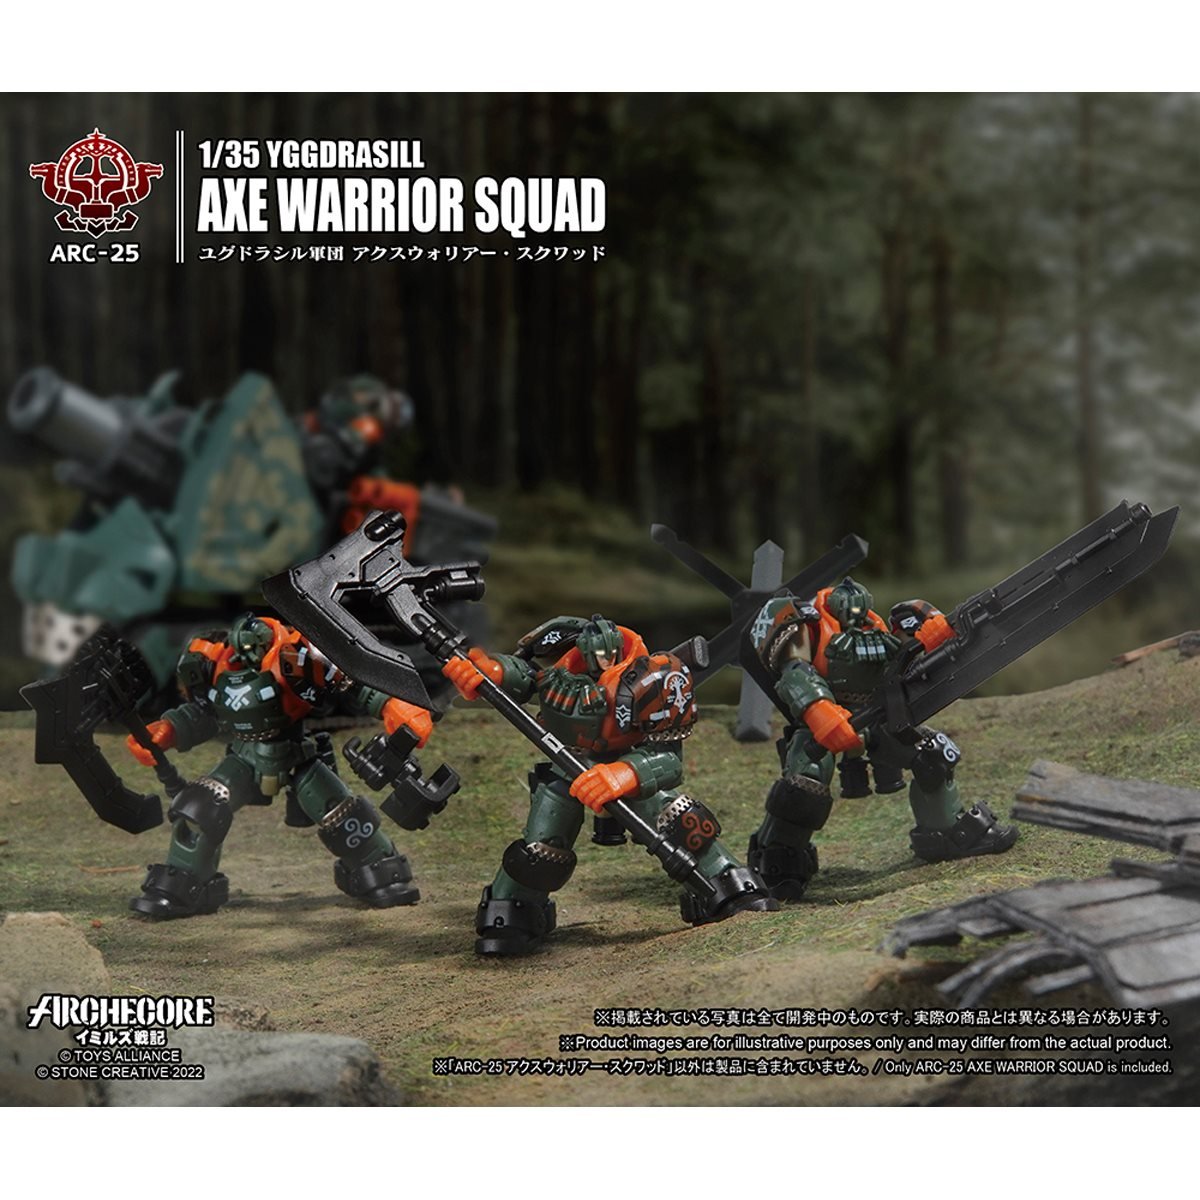 TOYS ALLIANCE Archecore Ymirus ARC-25 Yggdrasill Axe Warrior Squad 1:35 Scale Action Figure Set of 3